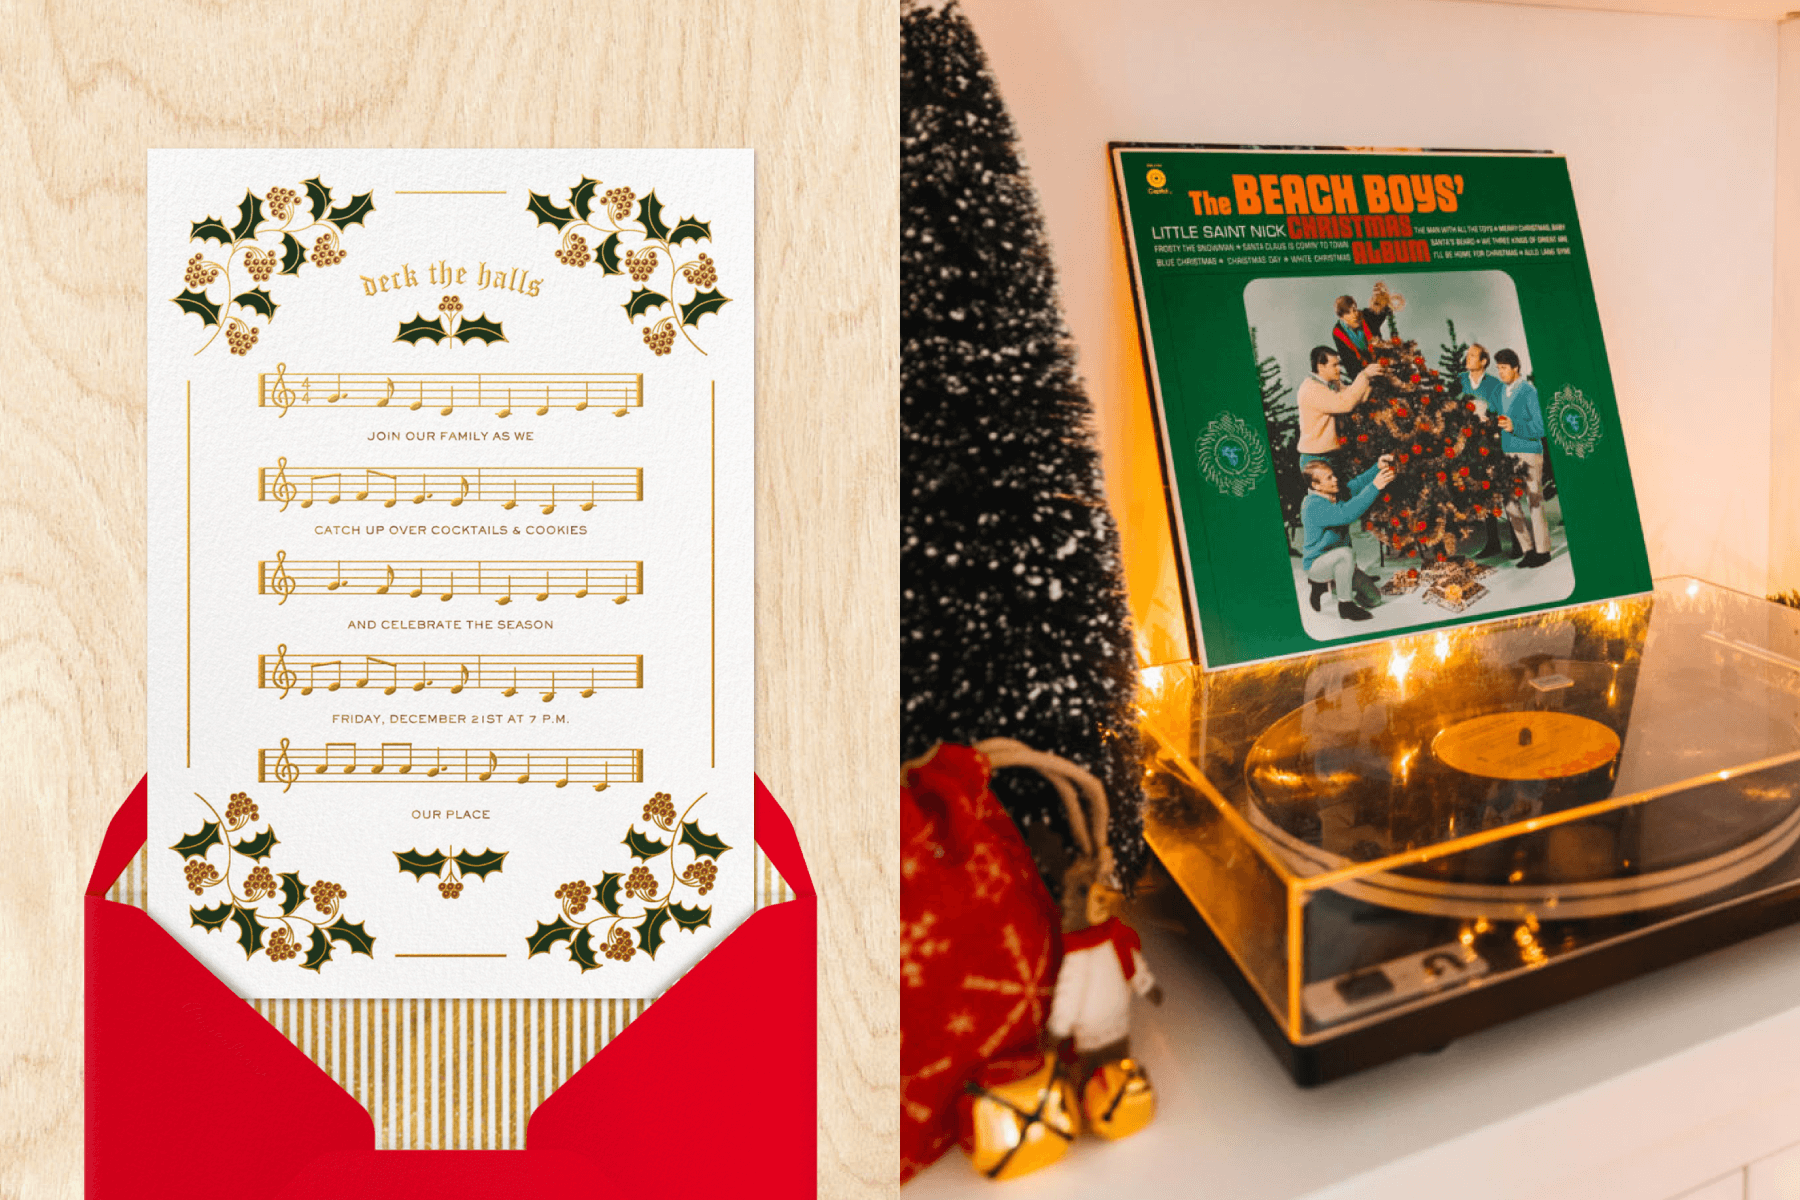 left: A holiday card designed to look like sheet music with holly in the corners. Right: A record player with the Beach Boys’ “Christmas Album” record resting on top.